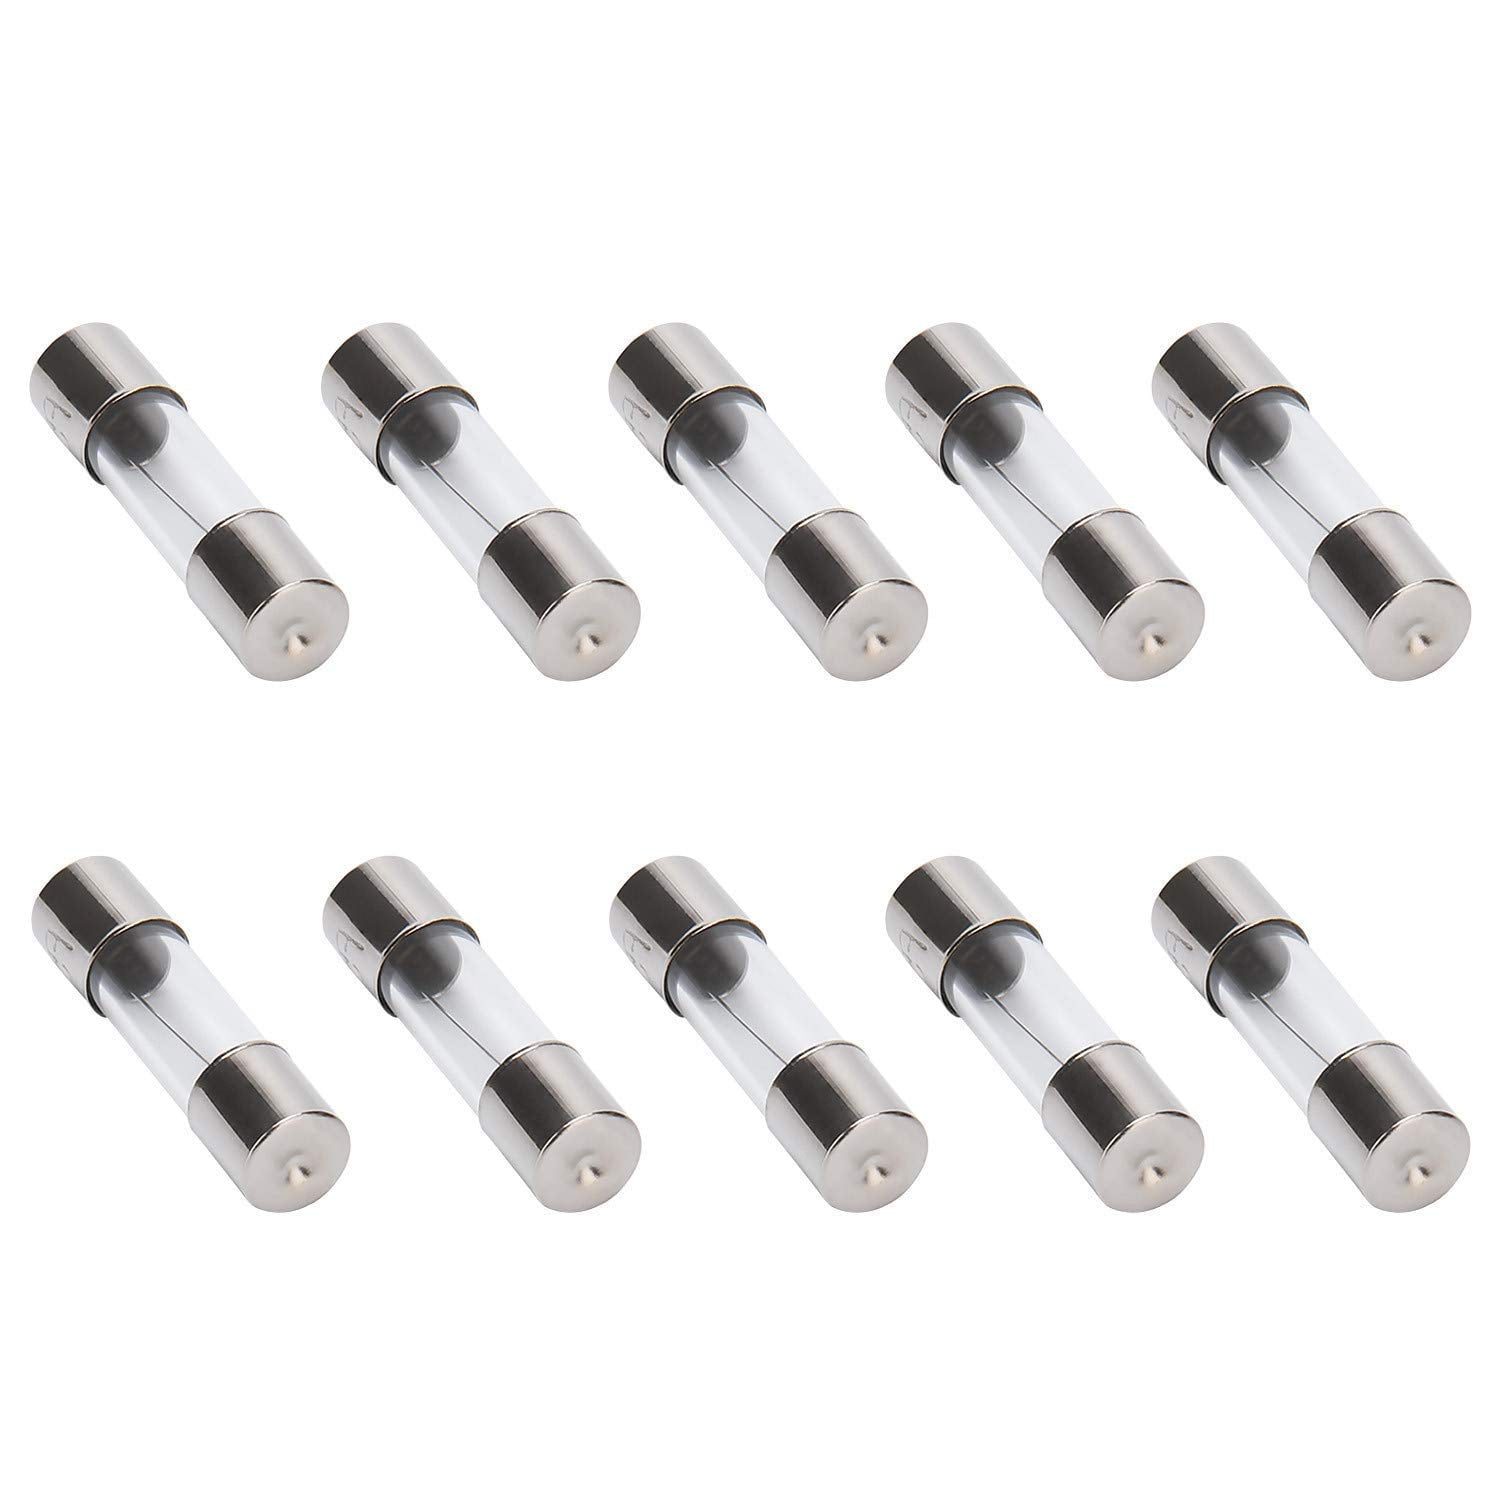 10 x 2.5A 20mm Glass Quick Blow Fuse 